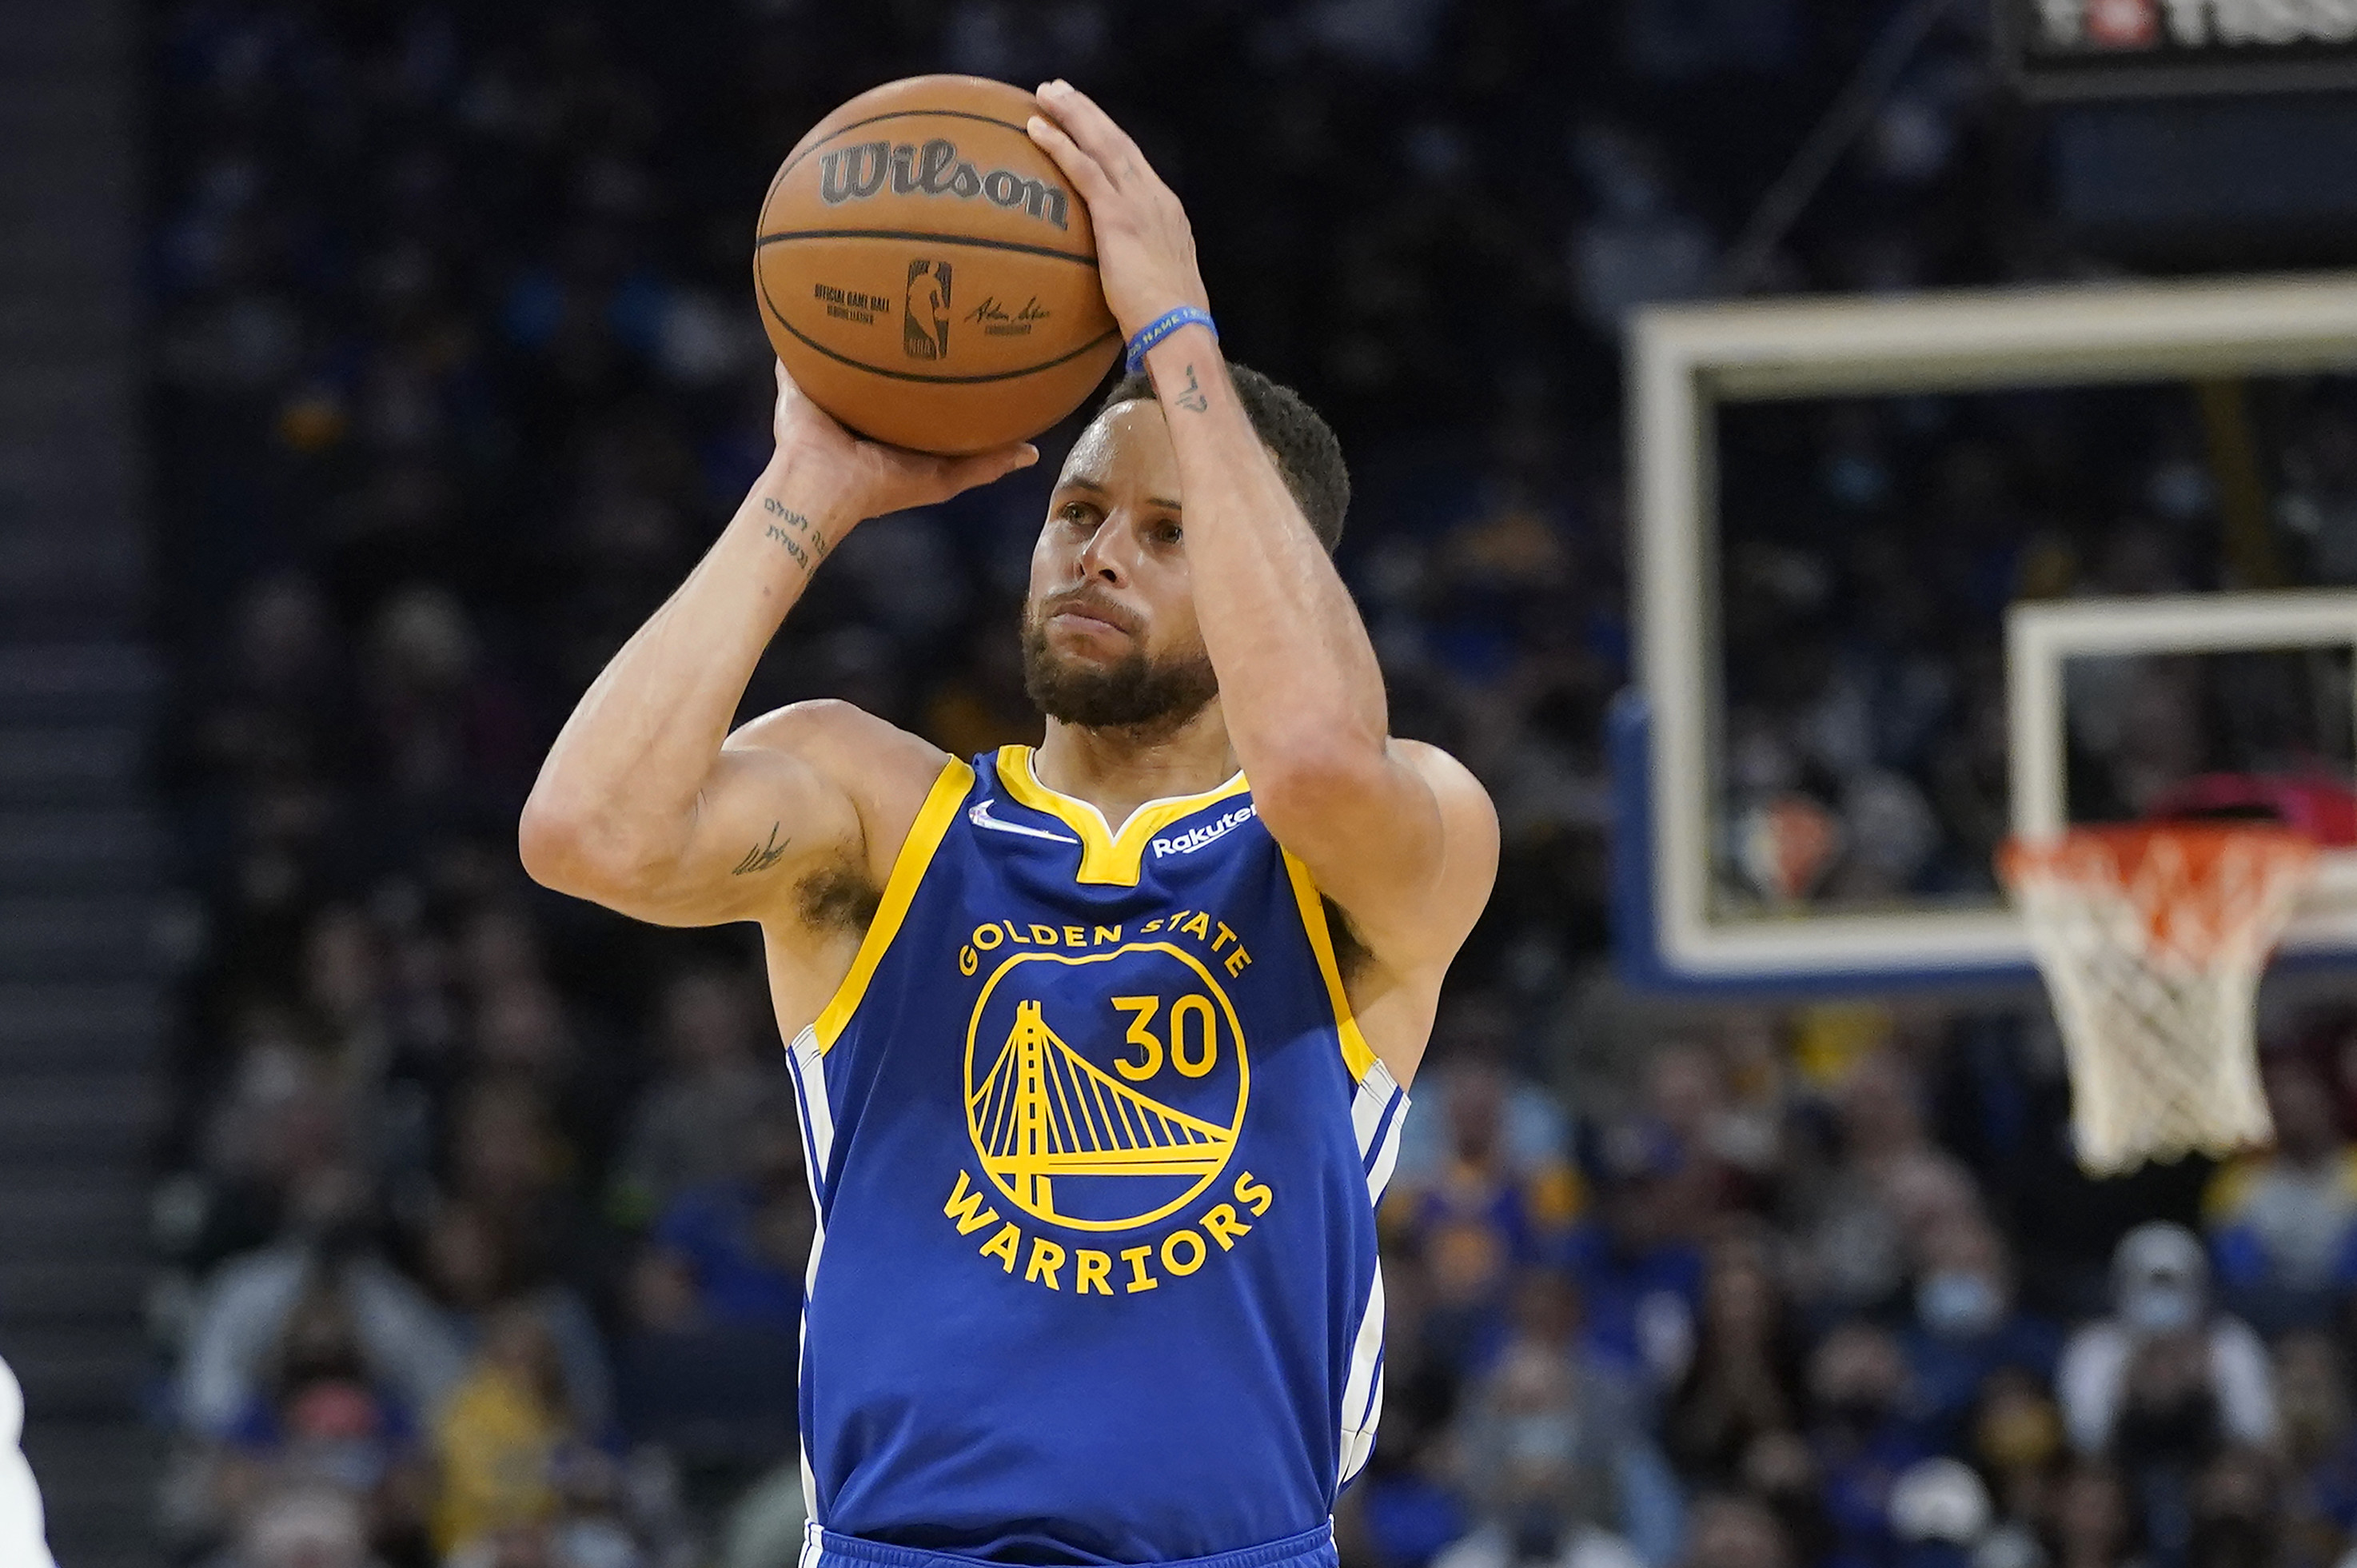 Warriors' Stephen Curry Used Technology to Shrink Basket to Help